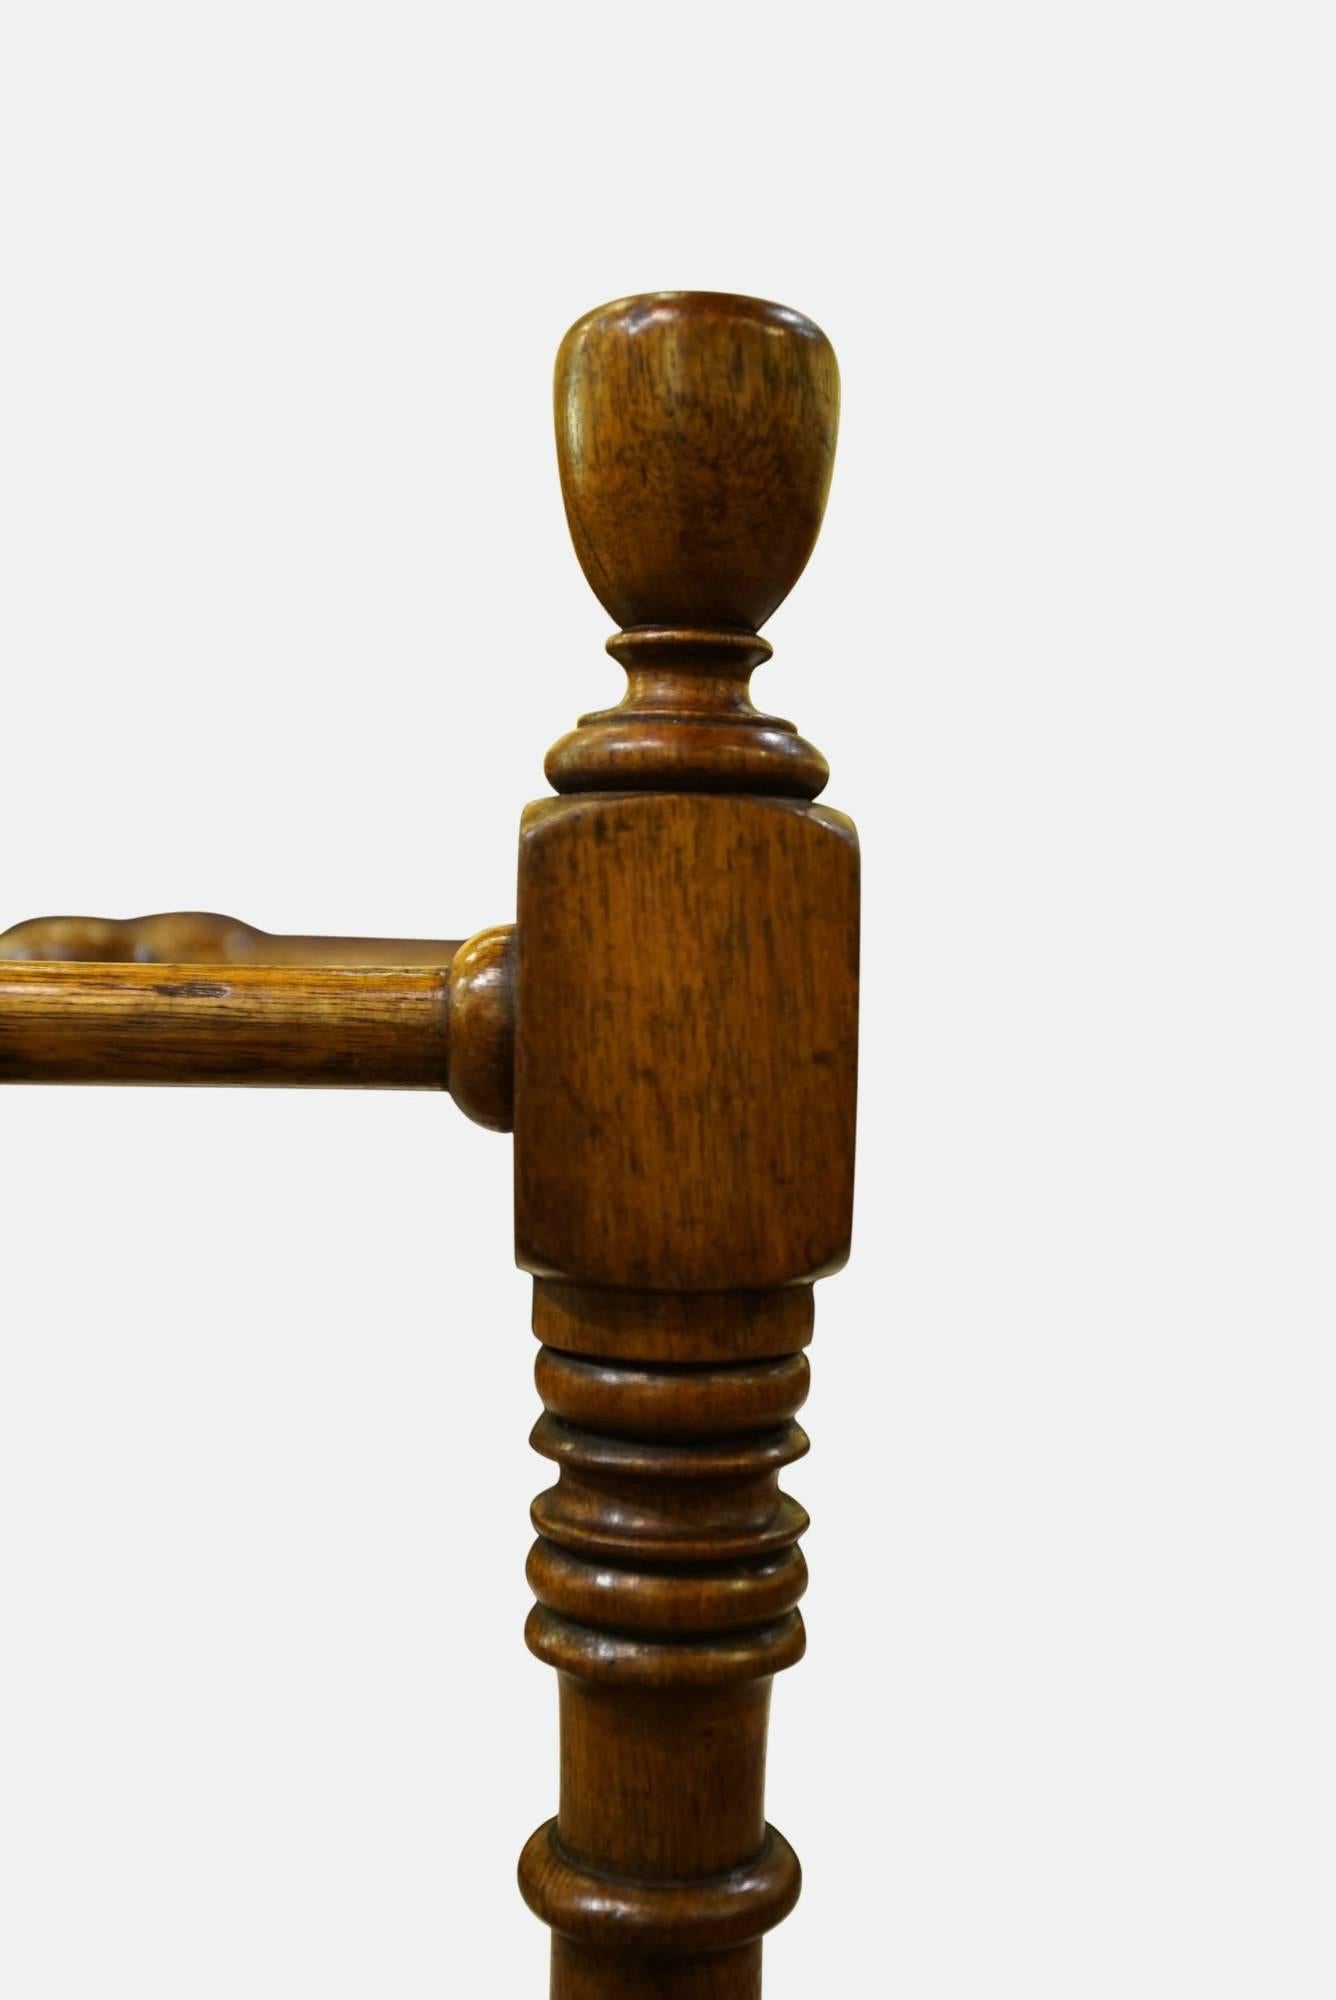 Walnut stick stand in the manner of Shoolbred & Co.

12 bays, bobbin turned divisions, and metal tray,

circa 1880.
 